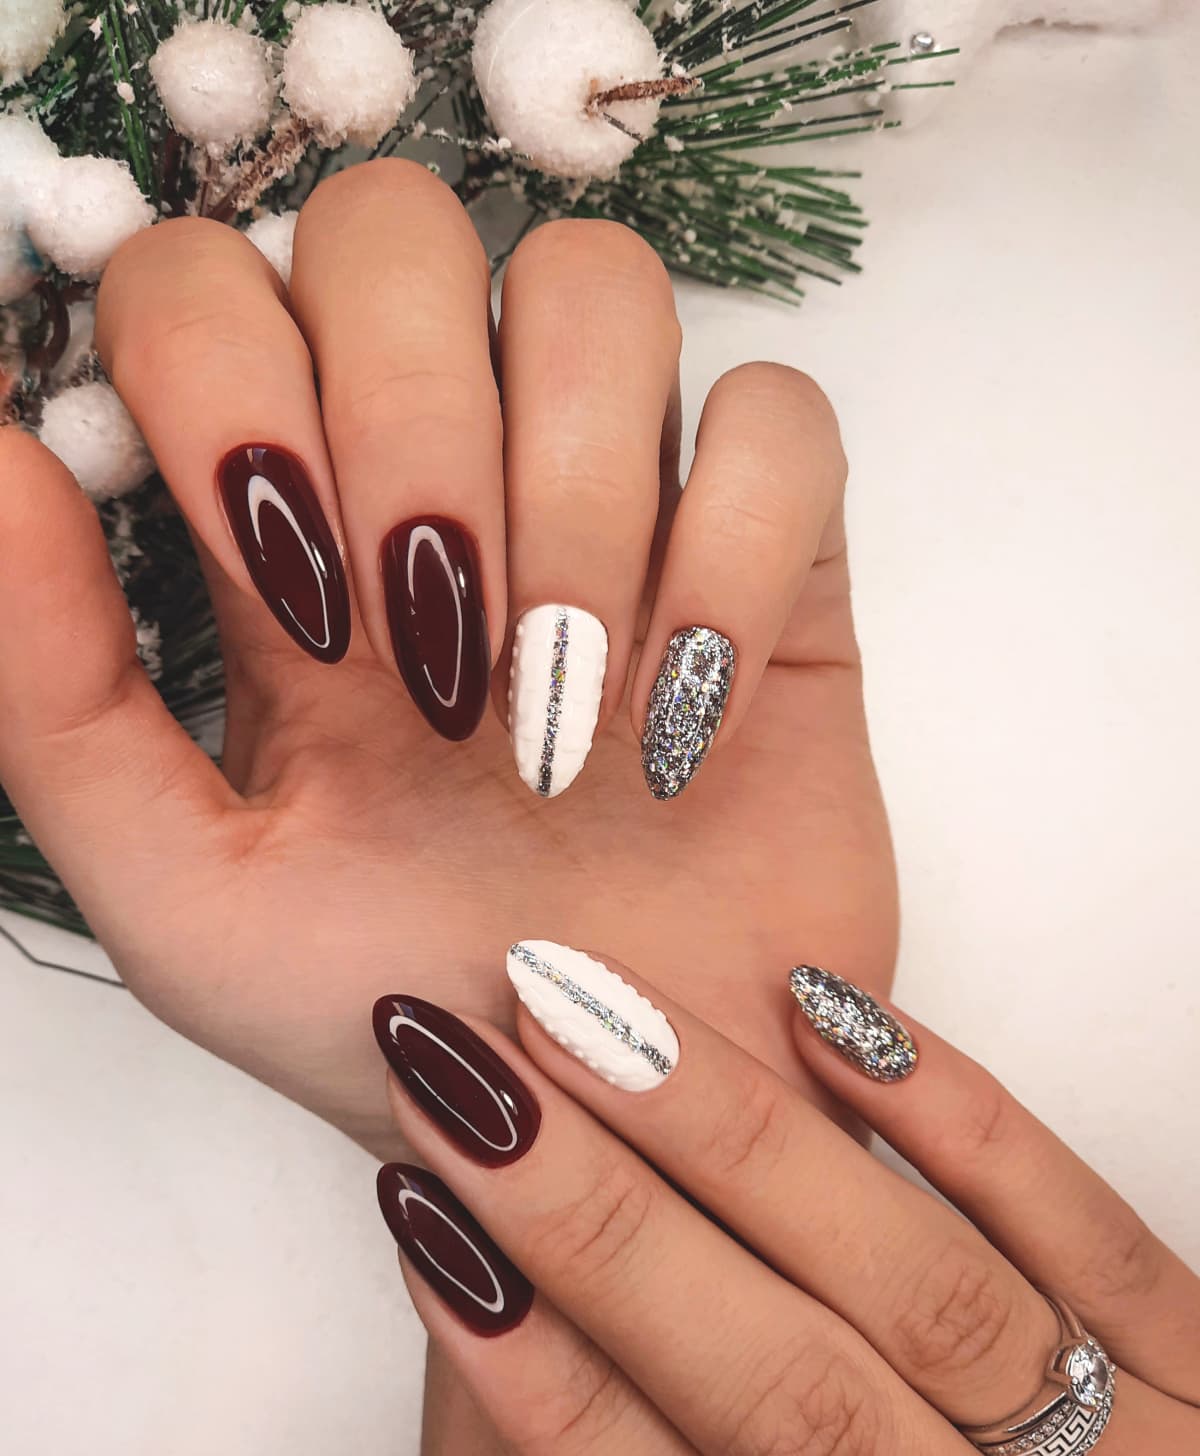 Hands with manicured nails for the holidays 